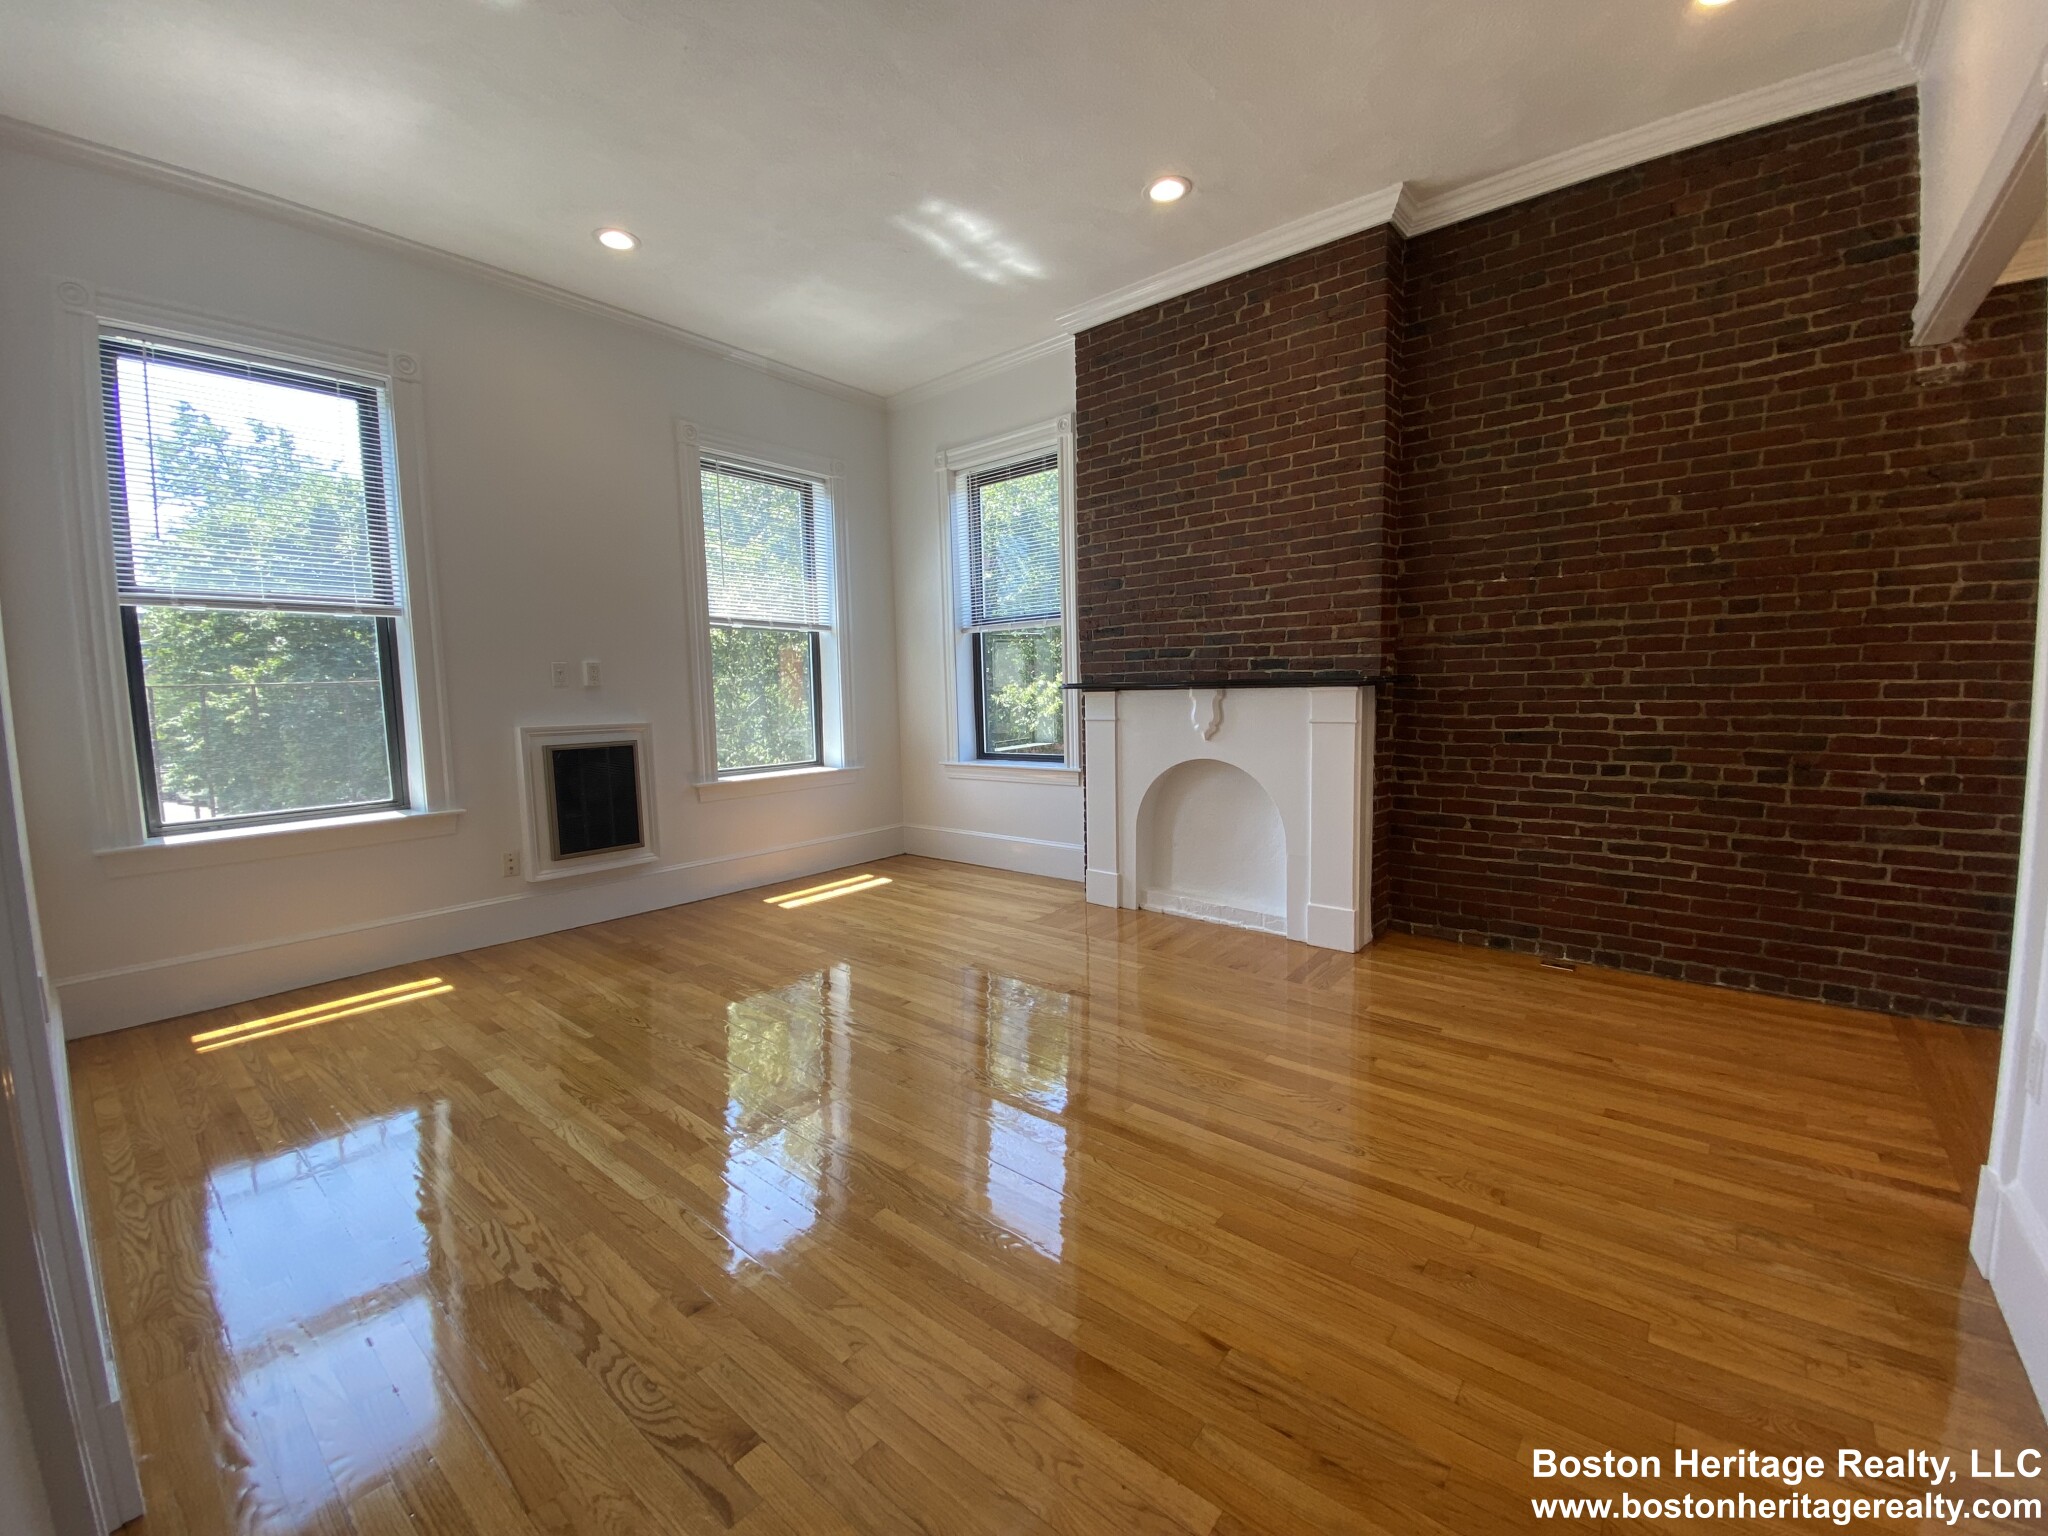 1 Bed, 1 Bath apartment in Boston, South End for $2,500